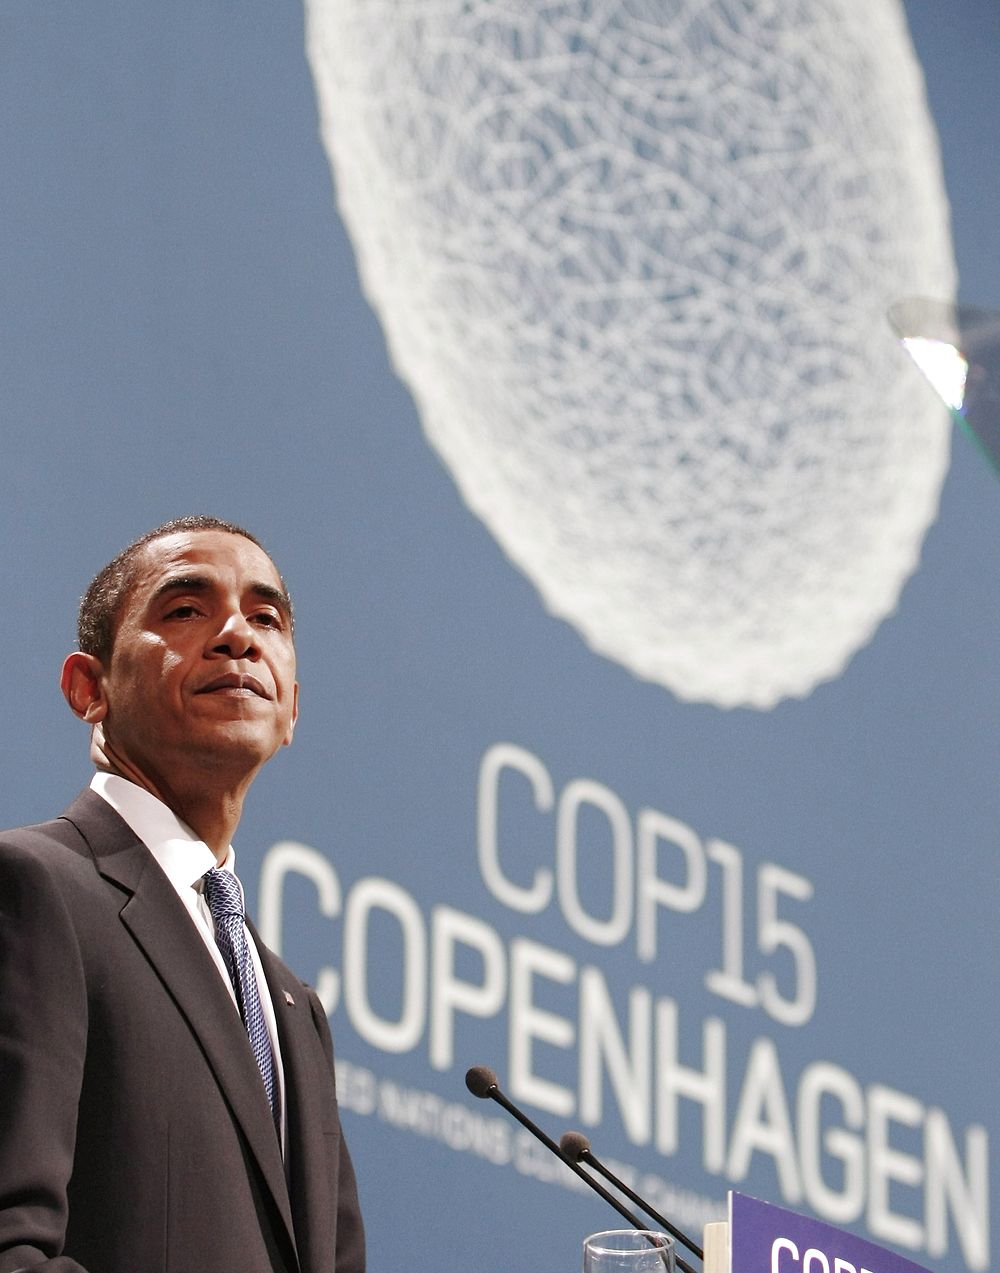 U.S. President Barack Obama attends the morning plenery session of the United Nations Climate Change Conference (COP15) at the Bella Center in Copenhagen, Denmark, December 18, 2009. REUTERS/Larry Downing (DENMARK - Tags: POLITICS)